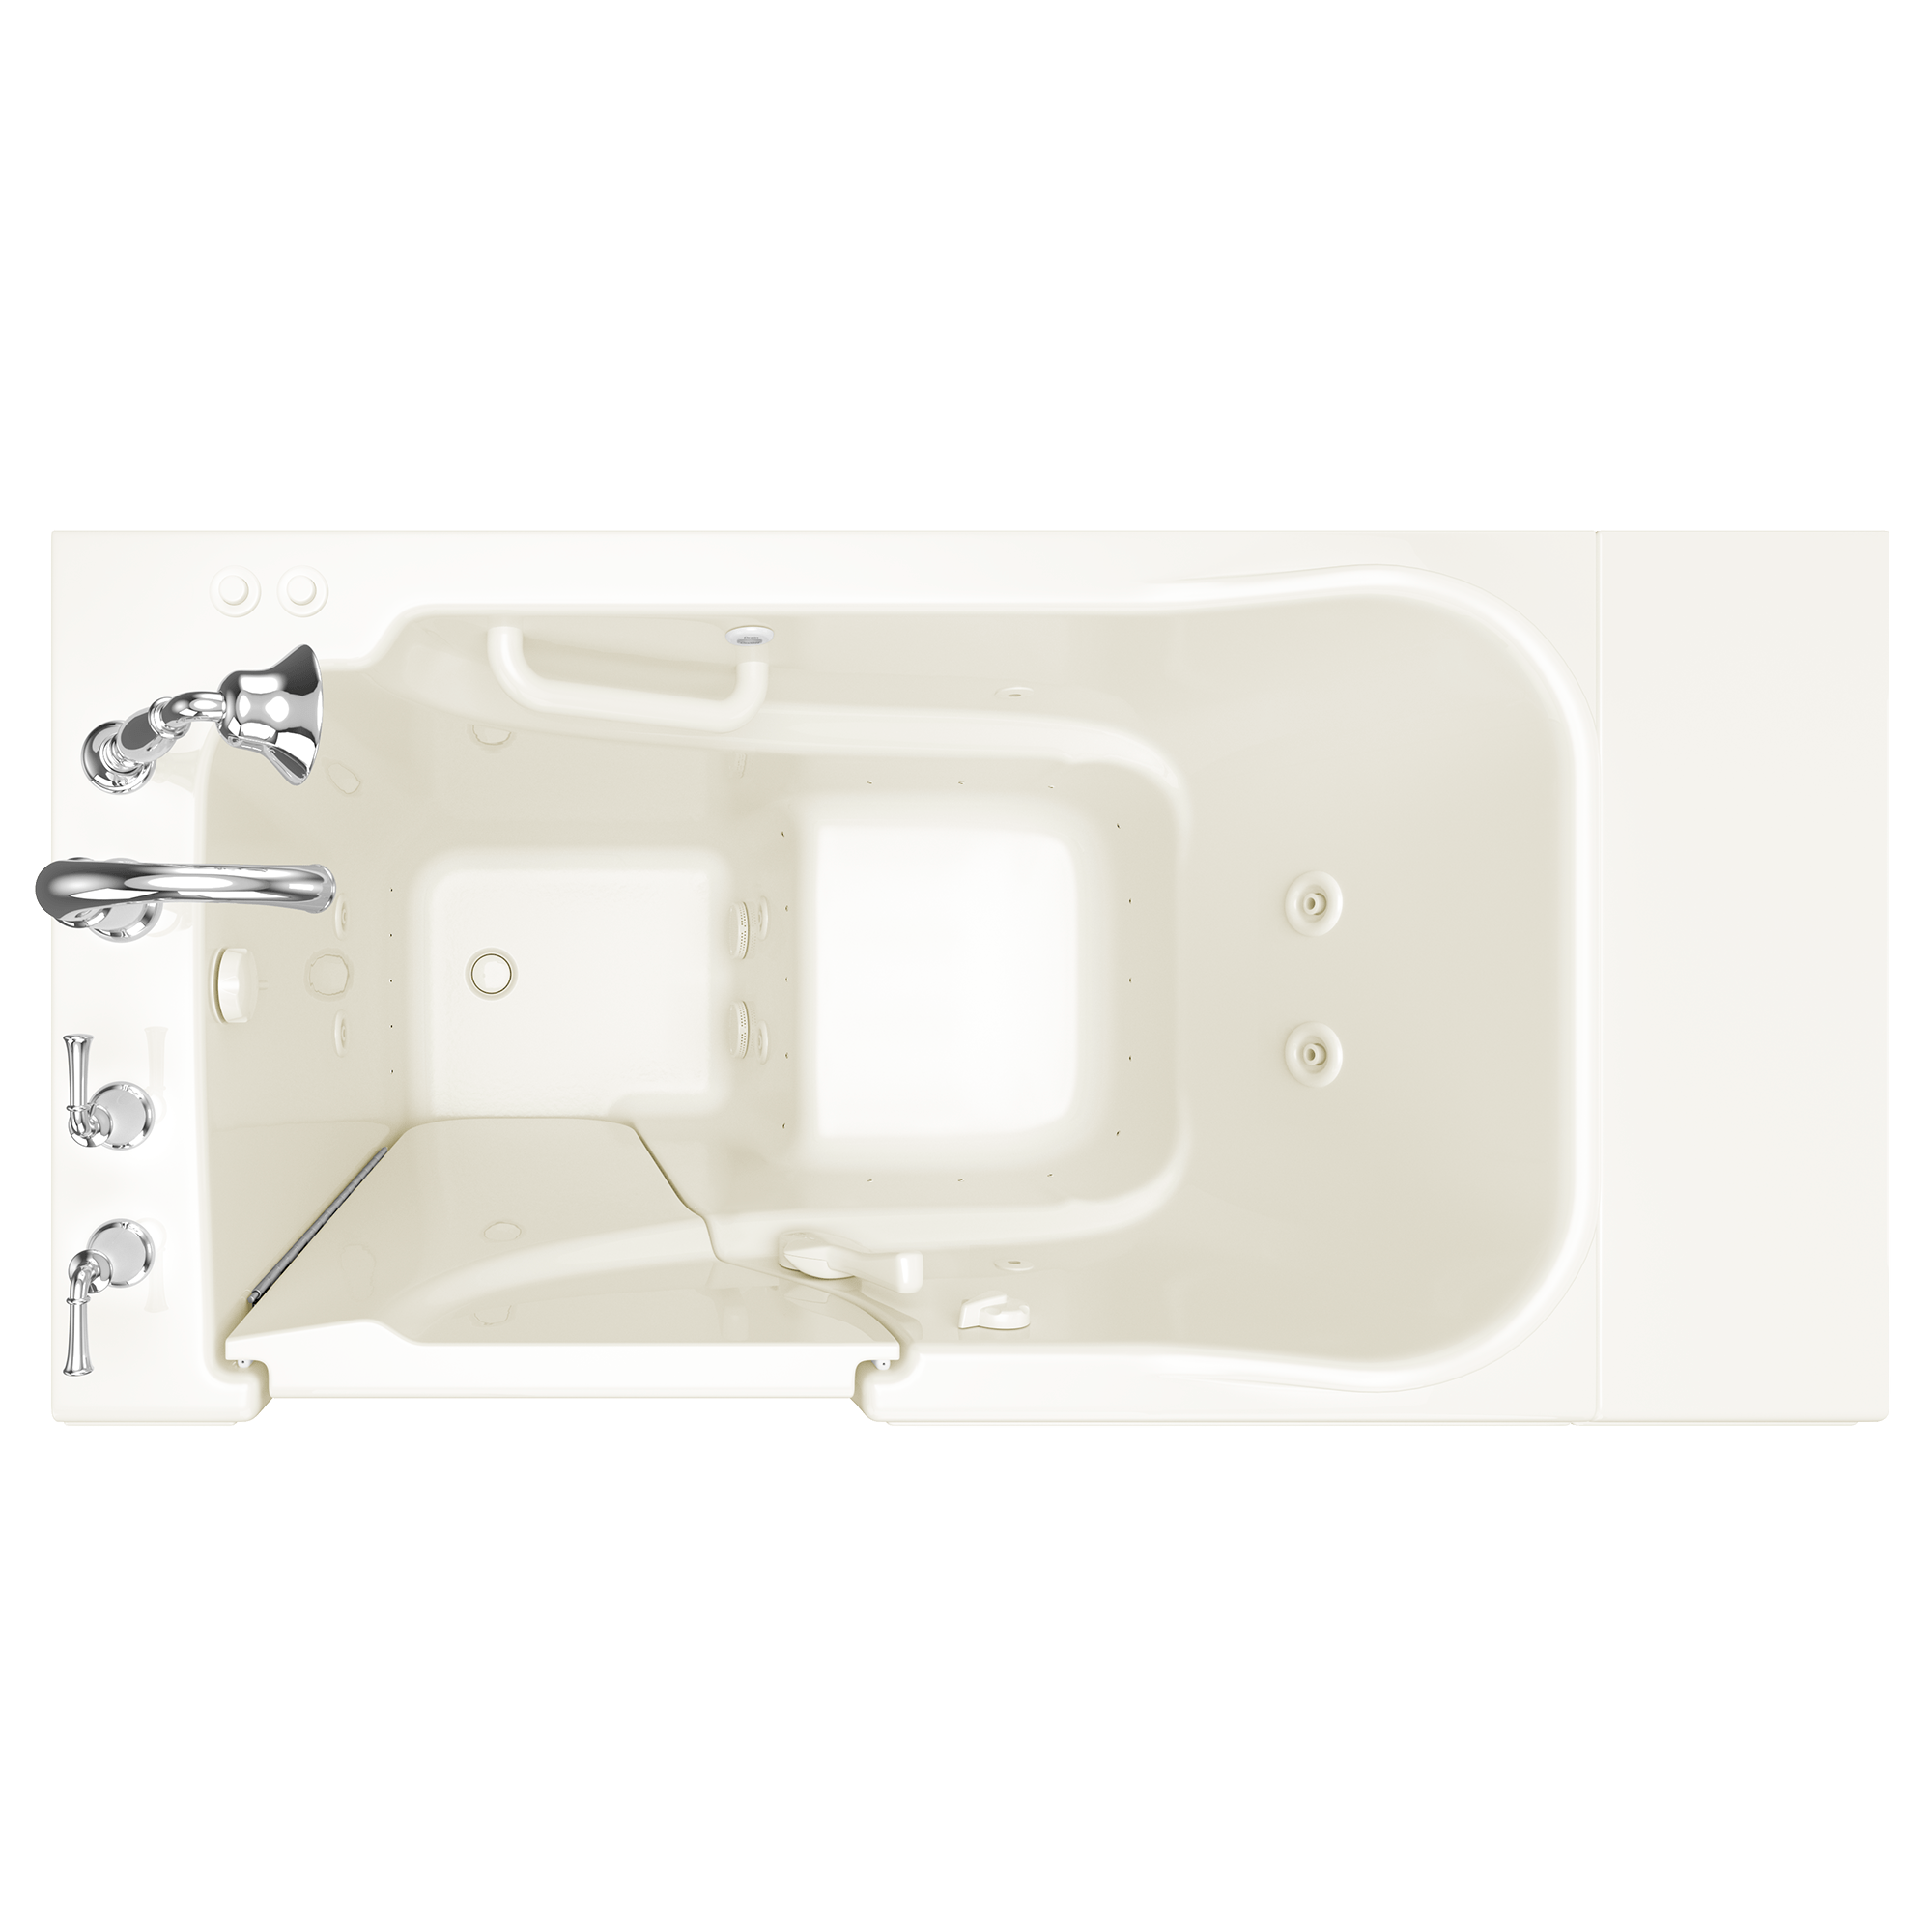 Gelcoat Value Series 30 x 52  Inch Walk in Tub With Combination Air Spa and Whirlpool Systems   Left Hand Drain With Faucet WIB LINEN